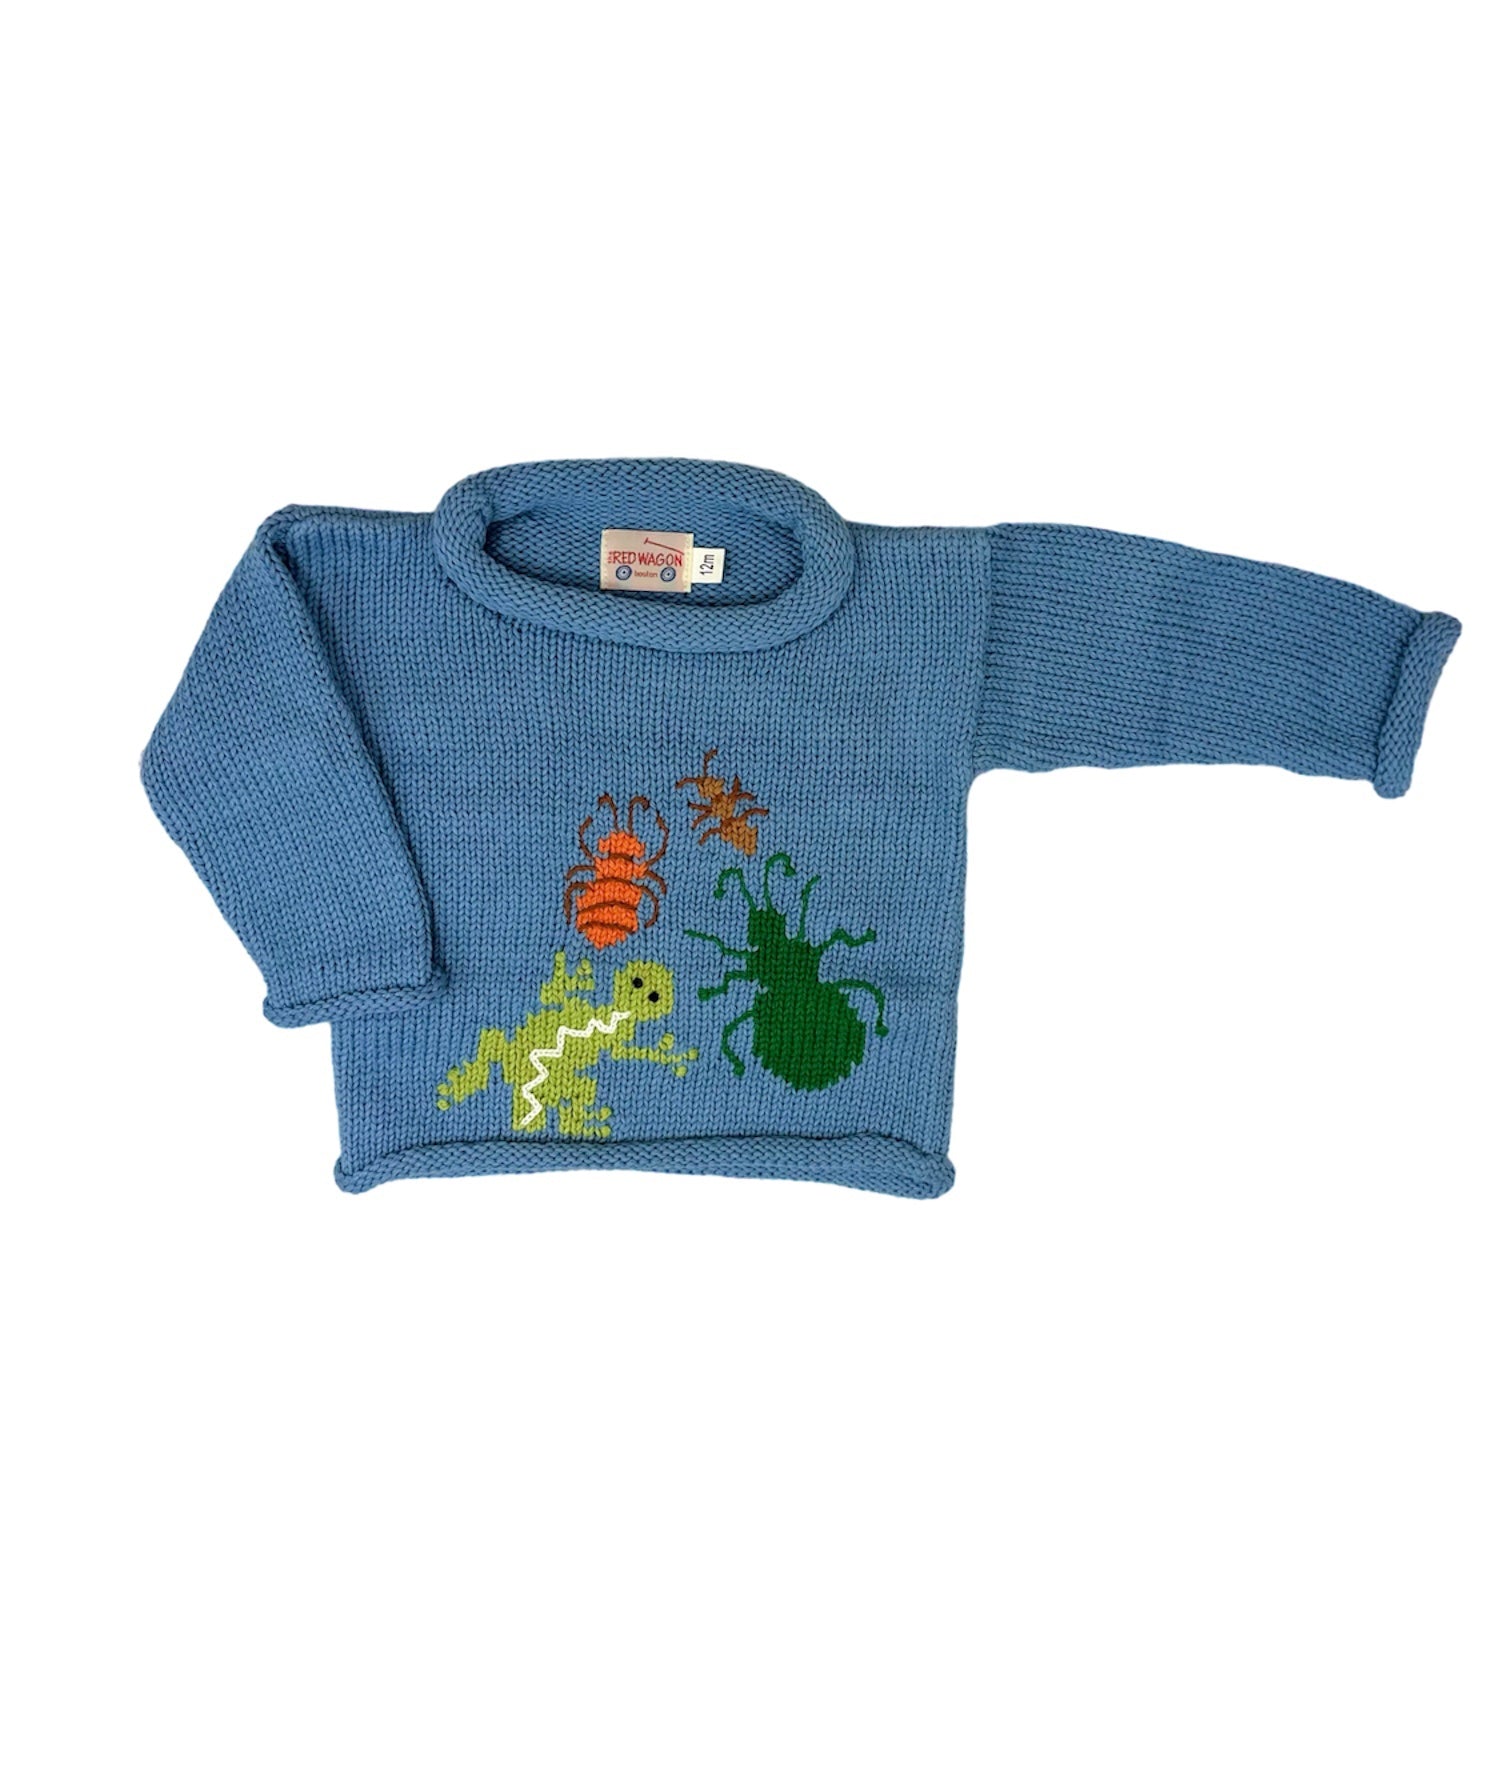 chambray blue sweater with orange and green bugs and gecko